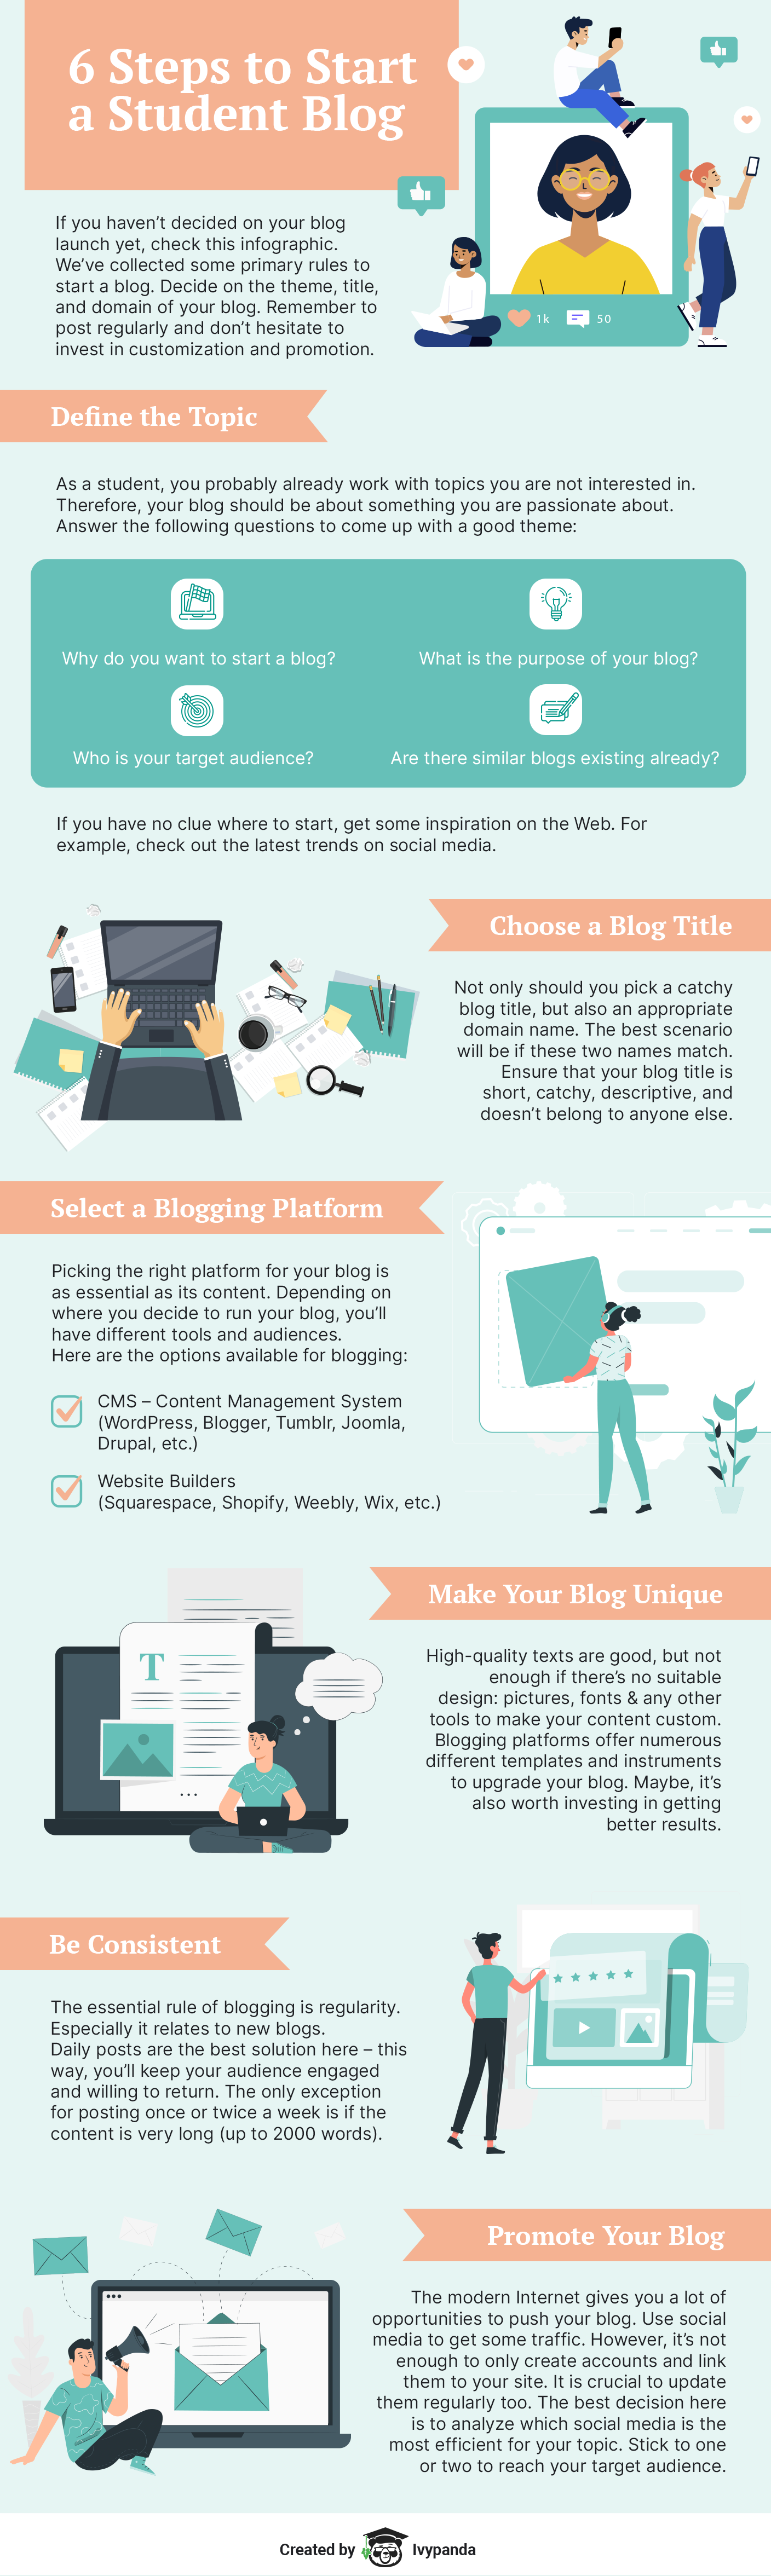 The infographic explains how to start blogging from a scratch.